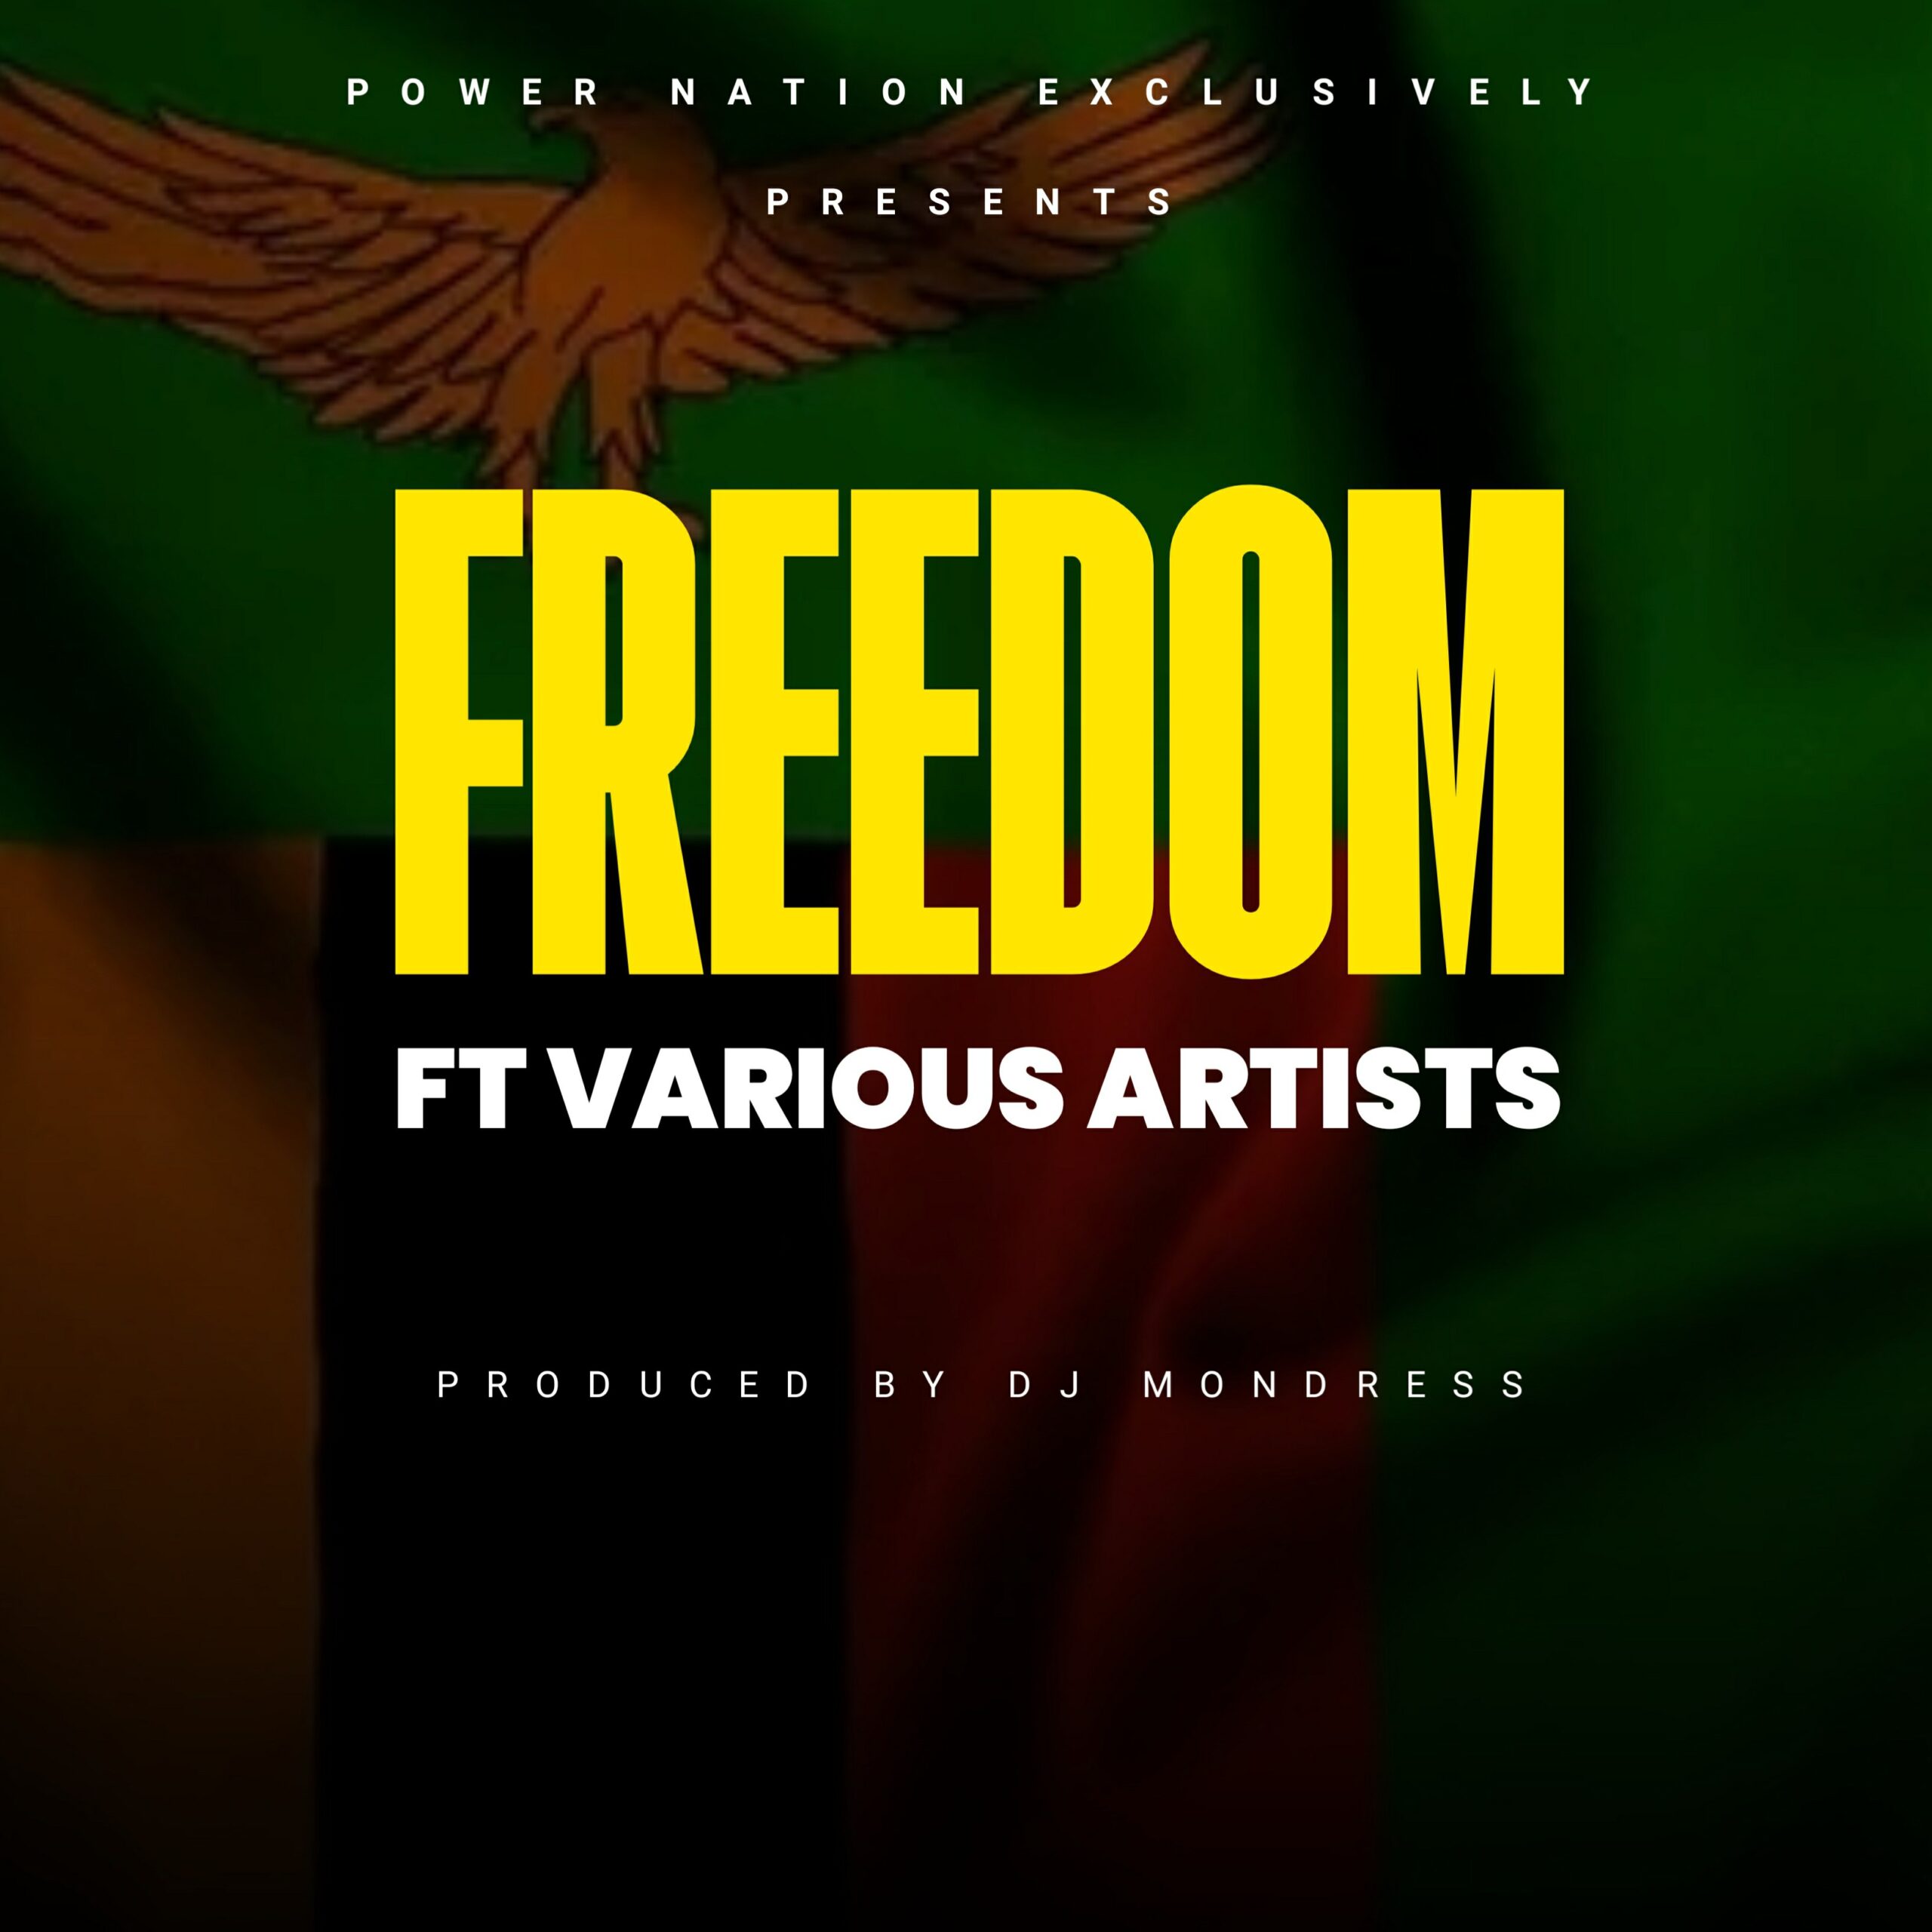 Power Nation Exclusively (PNE) FT. Various Artists - Freedom Mp3